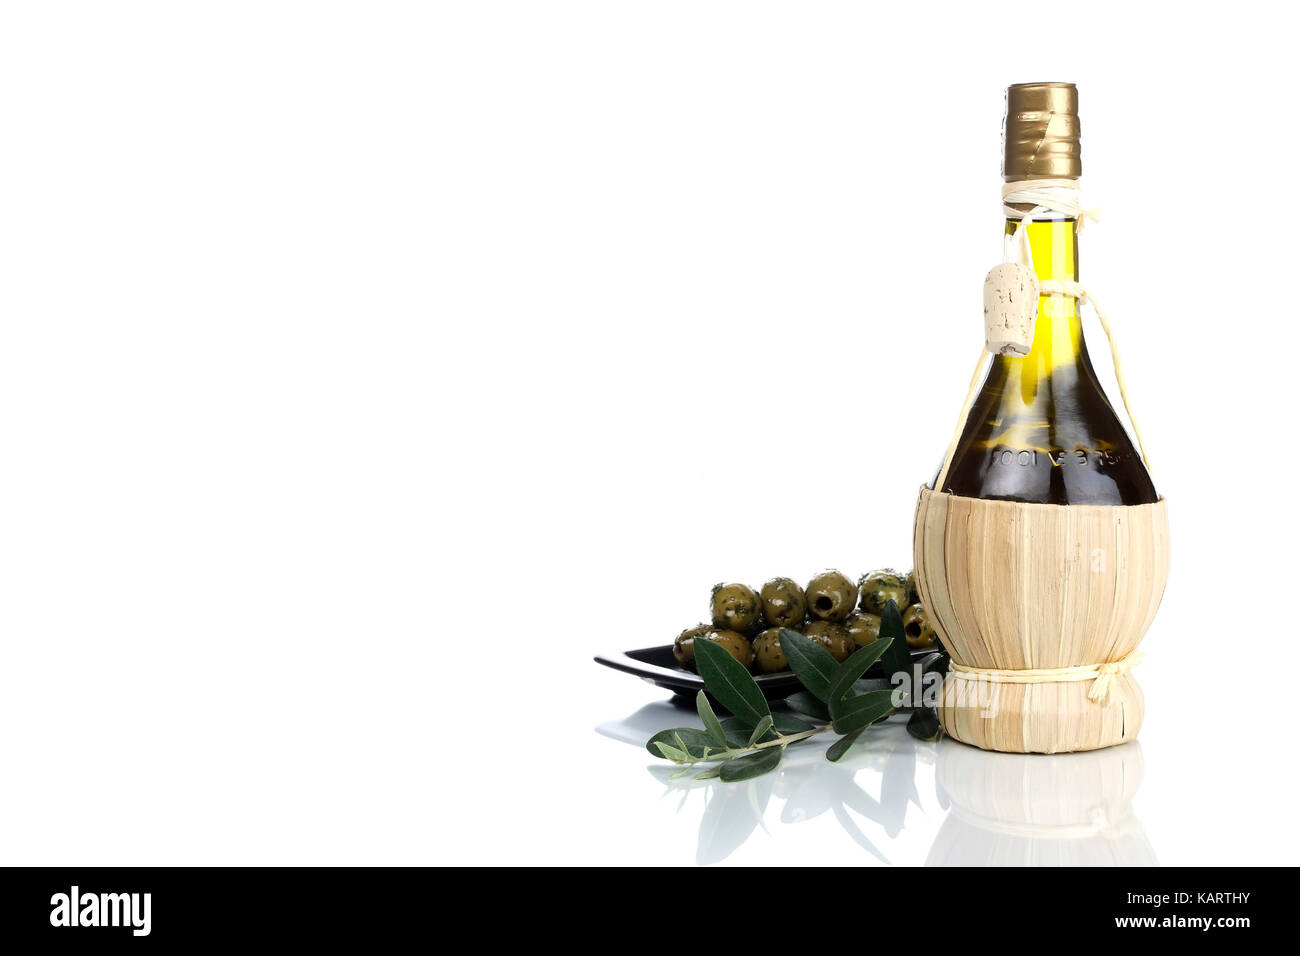 Geesthacht, olives with olive oil, Oliven mit Olivenoel Stock Photo